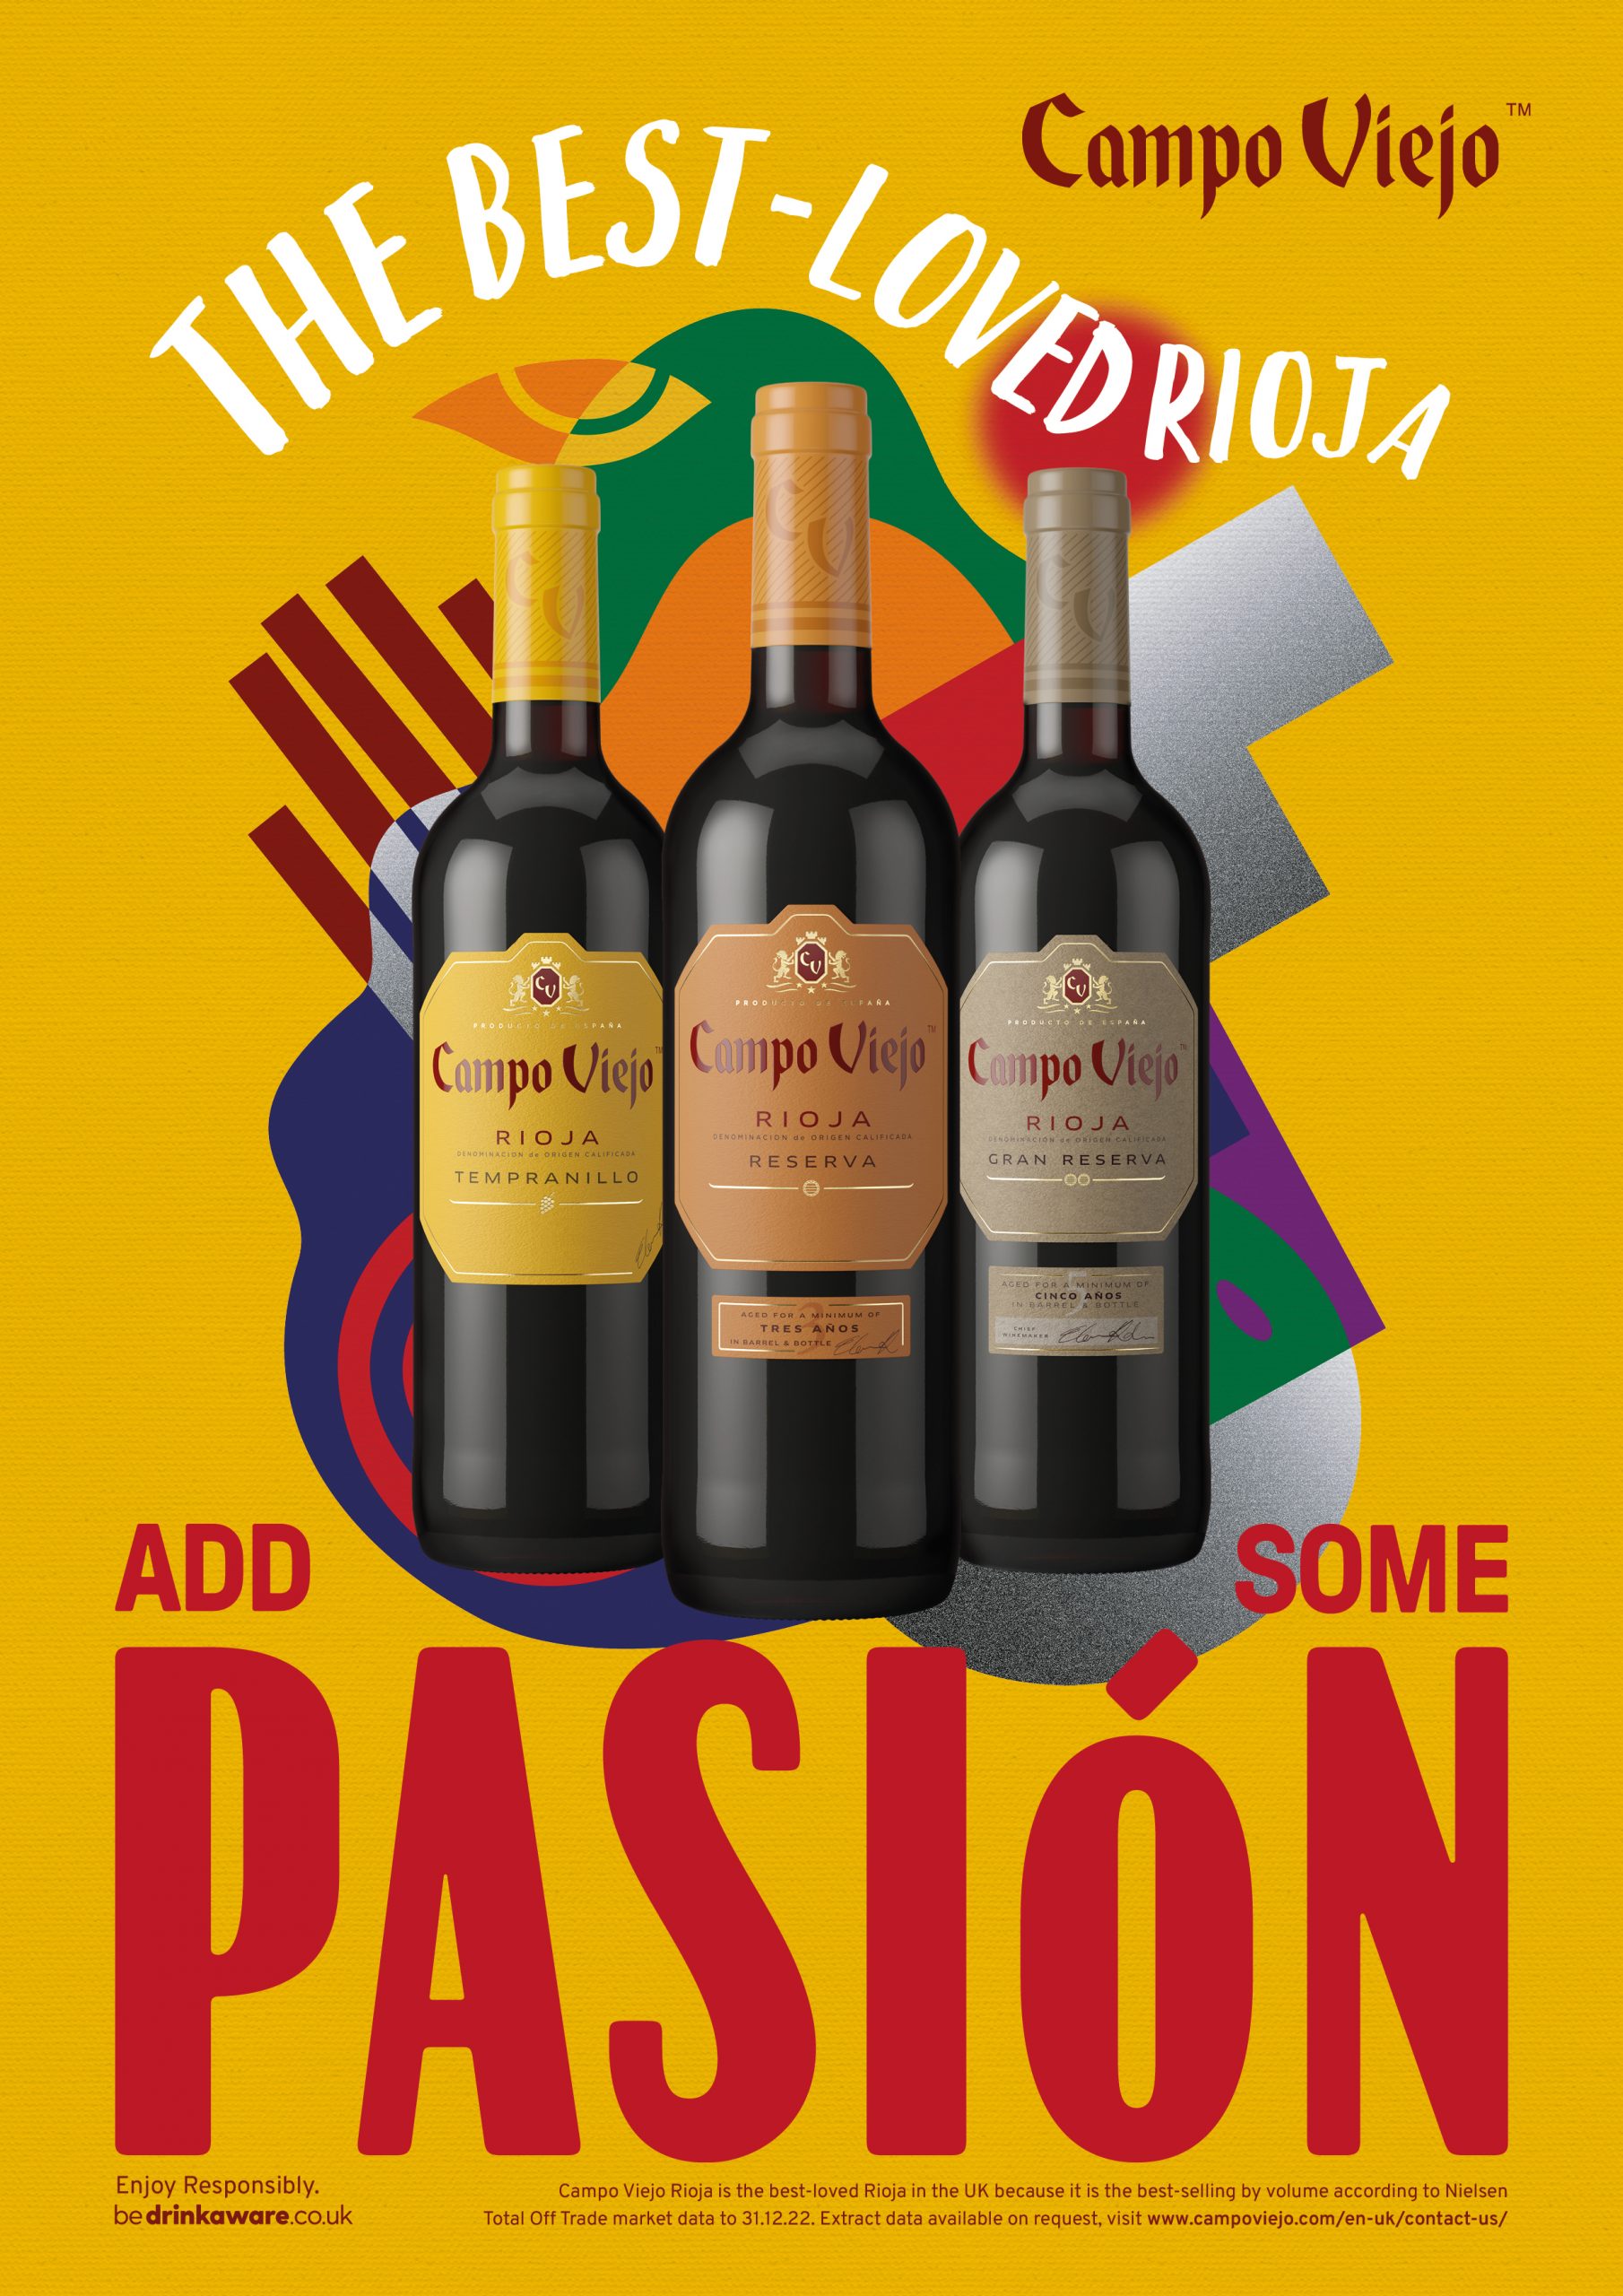 Campo Viejo inspires consumers to ‘add some pasión’ to their lives